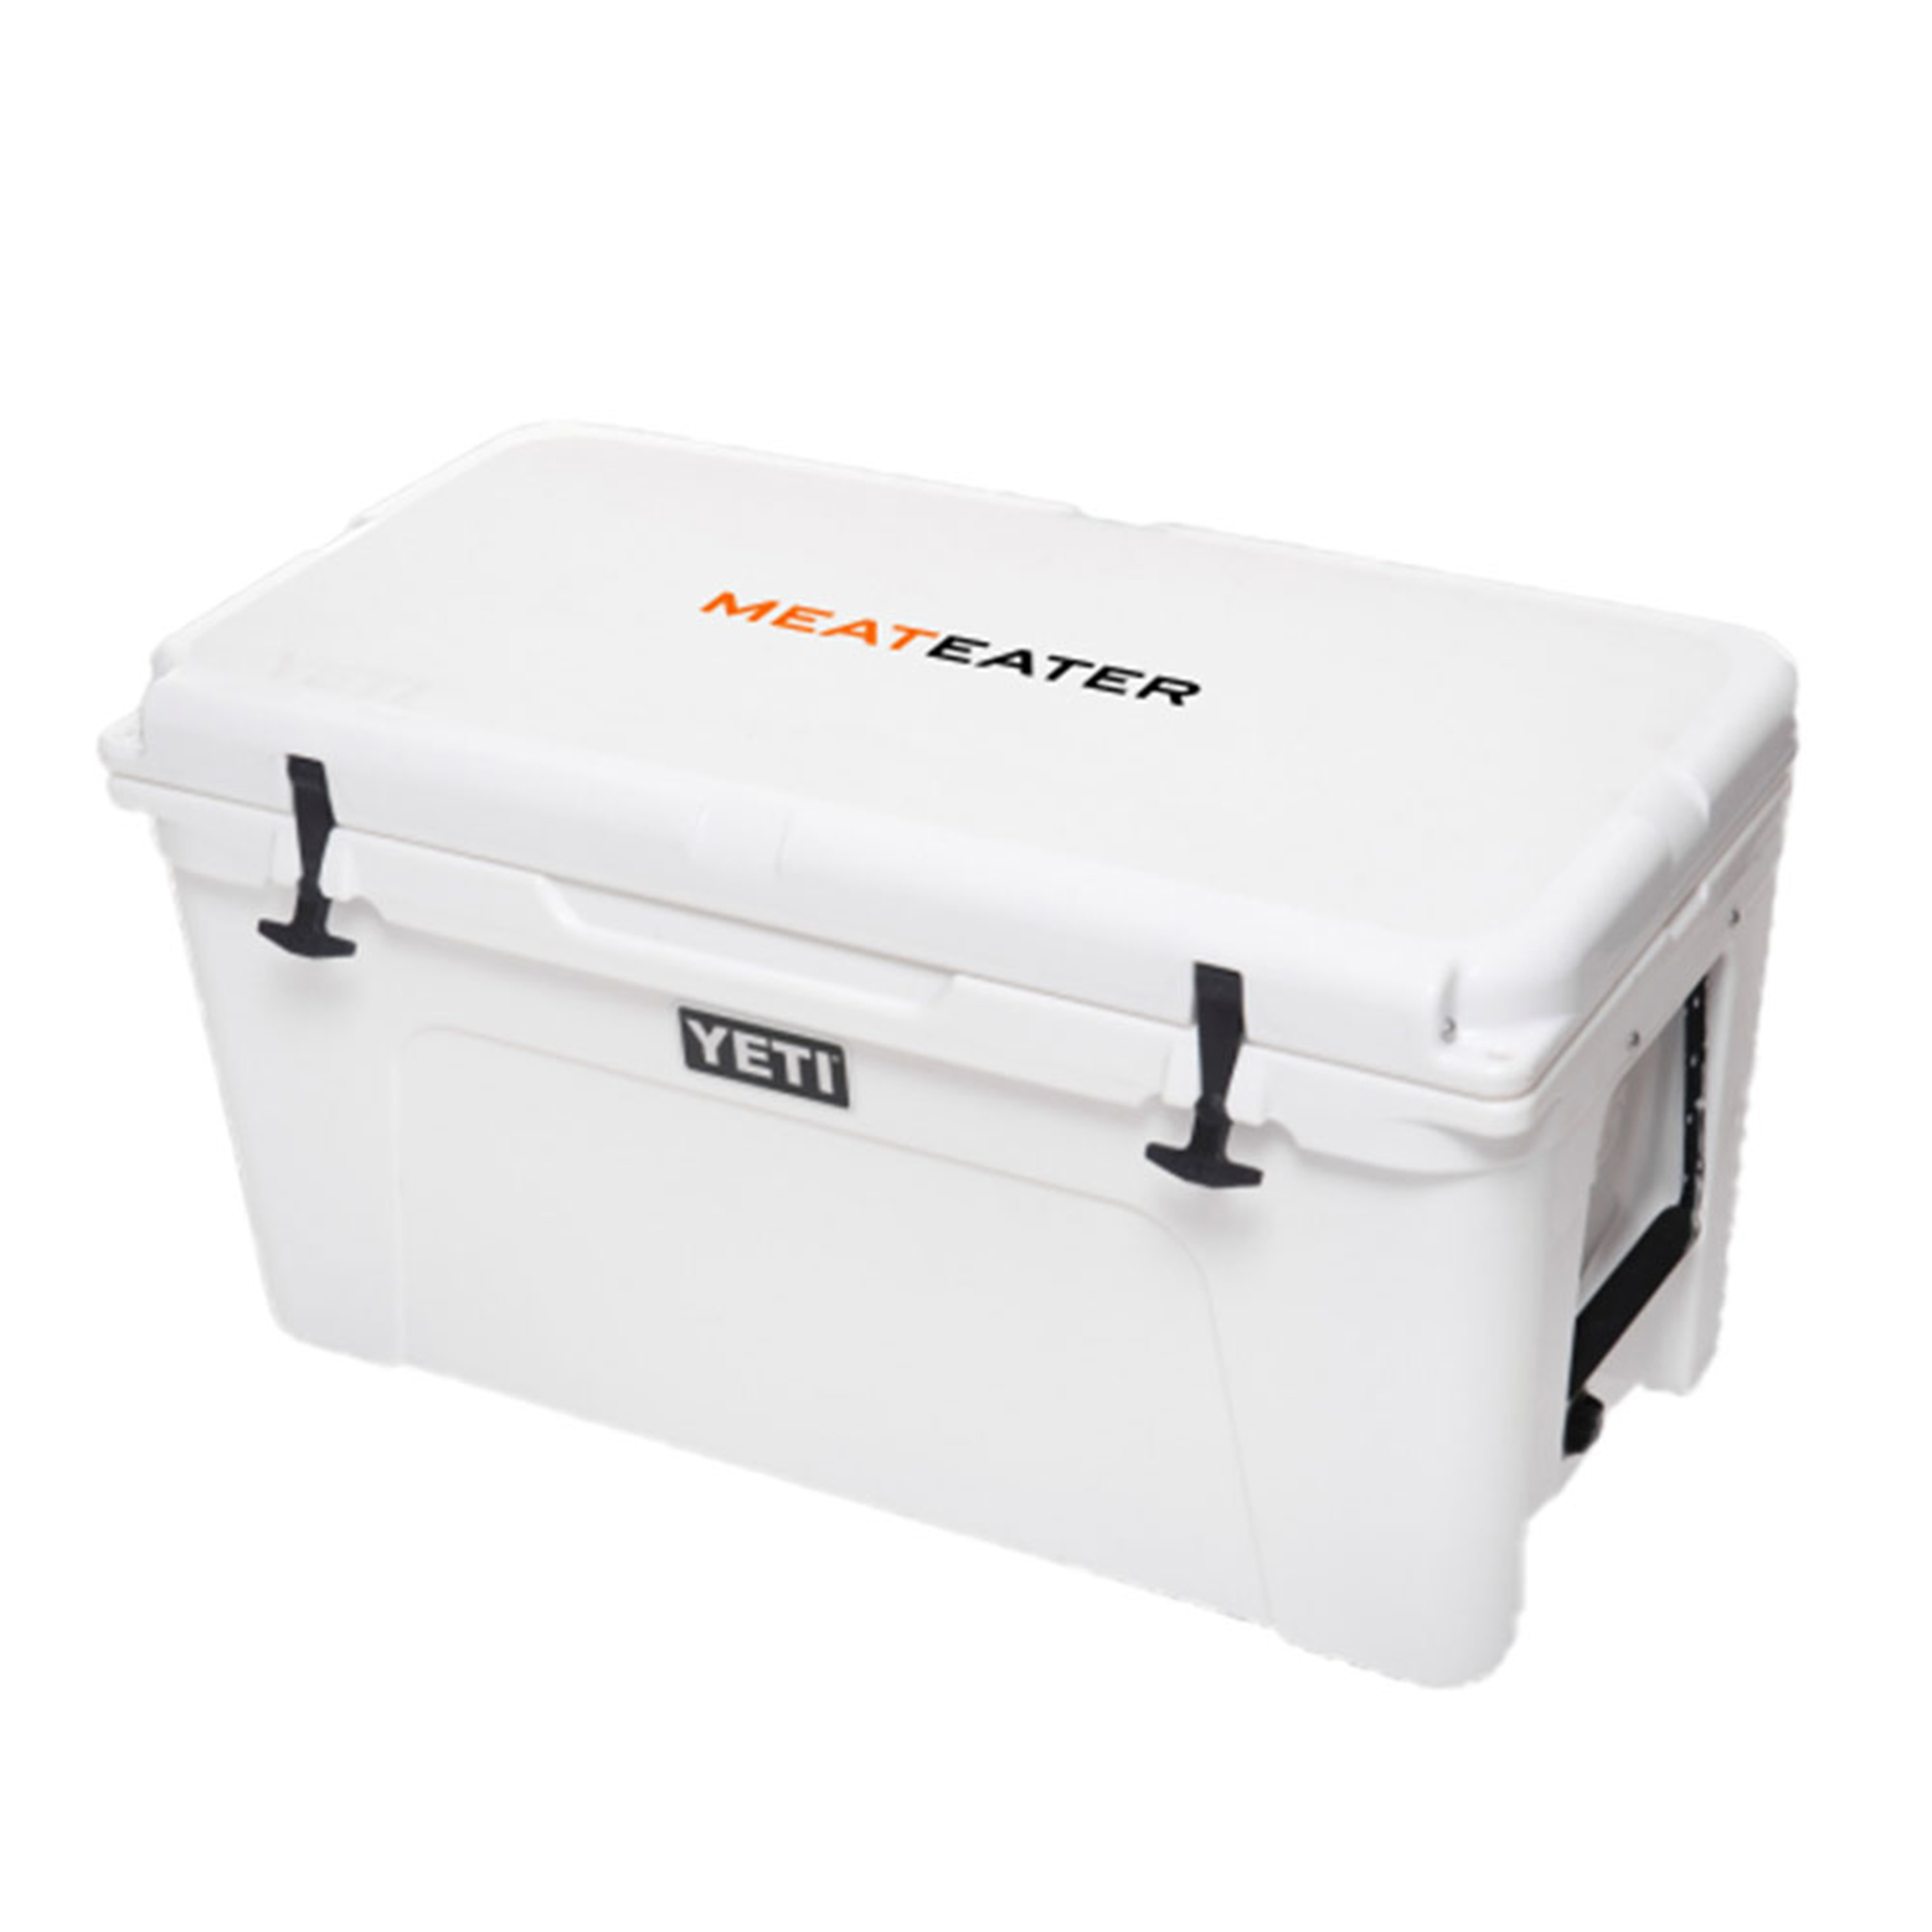 https://store.themeateater.com/on/demandware.static/-/Sites-meateater-master/default/dwa579b9c8/meateater-branded-yeti-tundra-65/meateater-branded-yeti-tundra-65_color_white.jpg